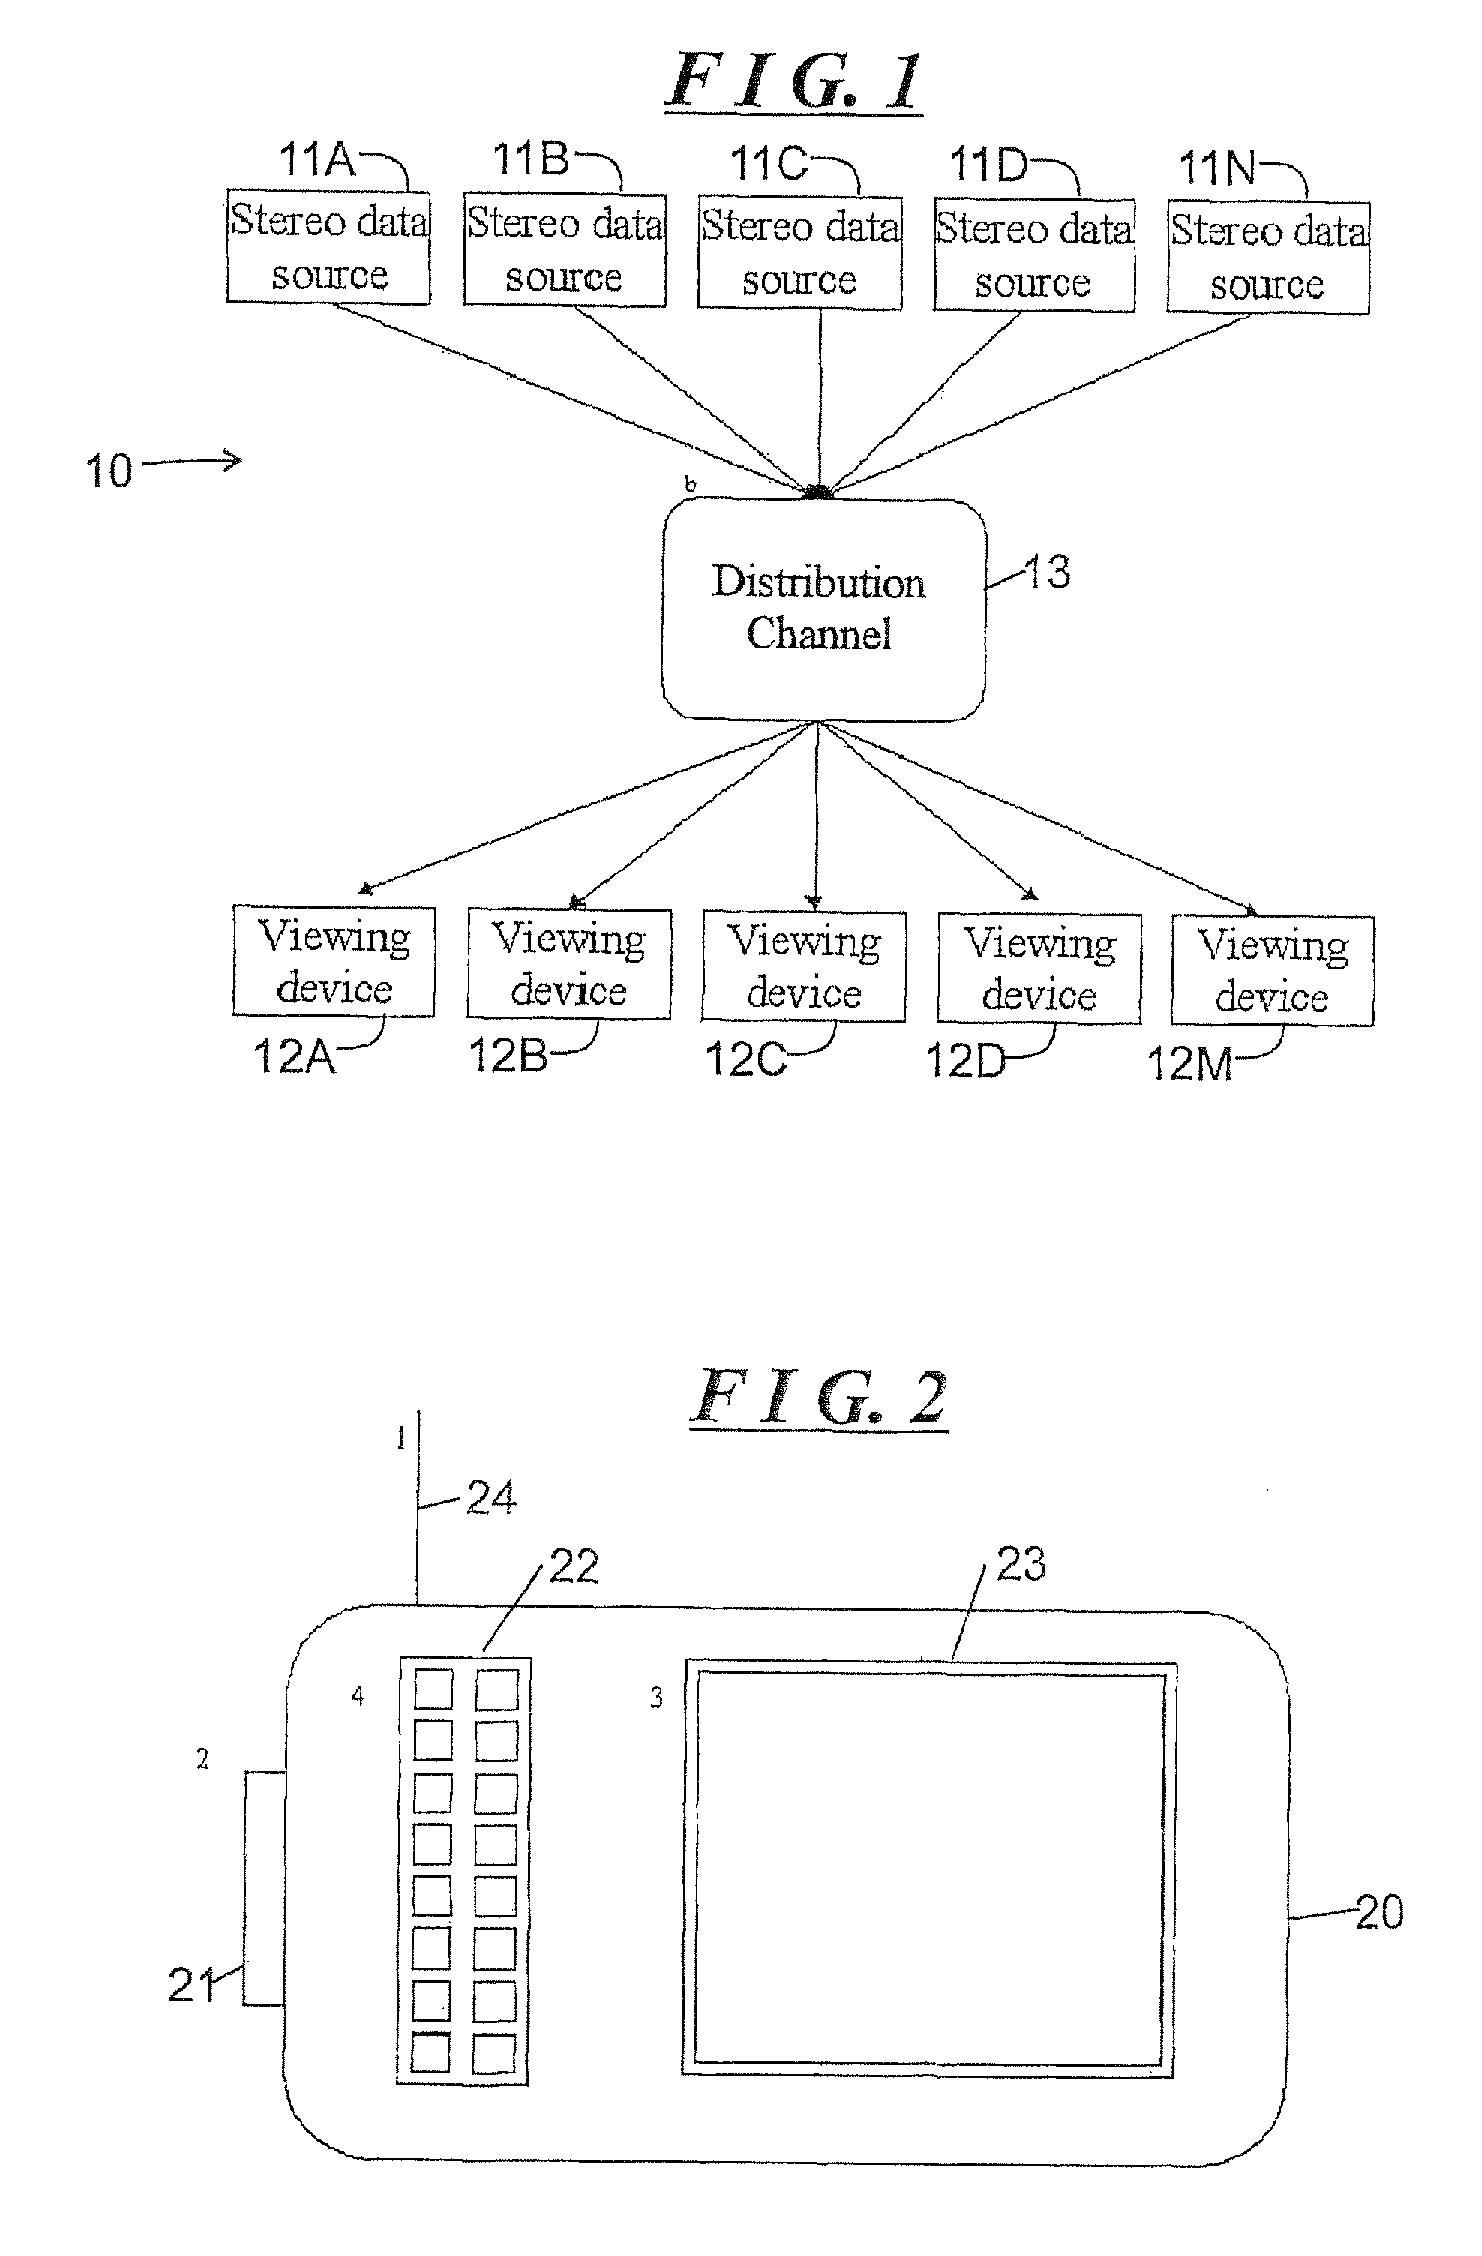 System and method for capturing and viewing stereoscopic panoramic images